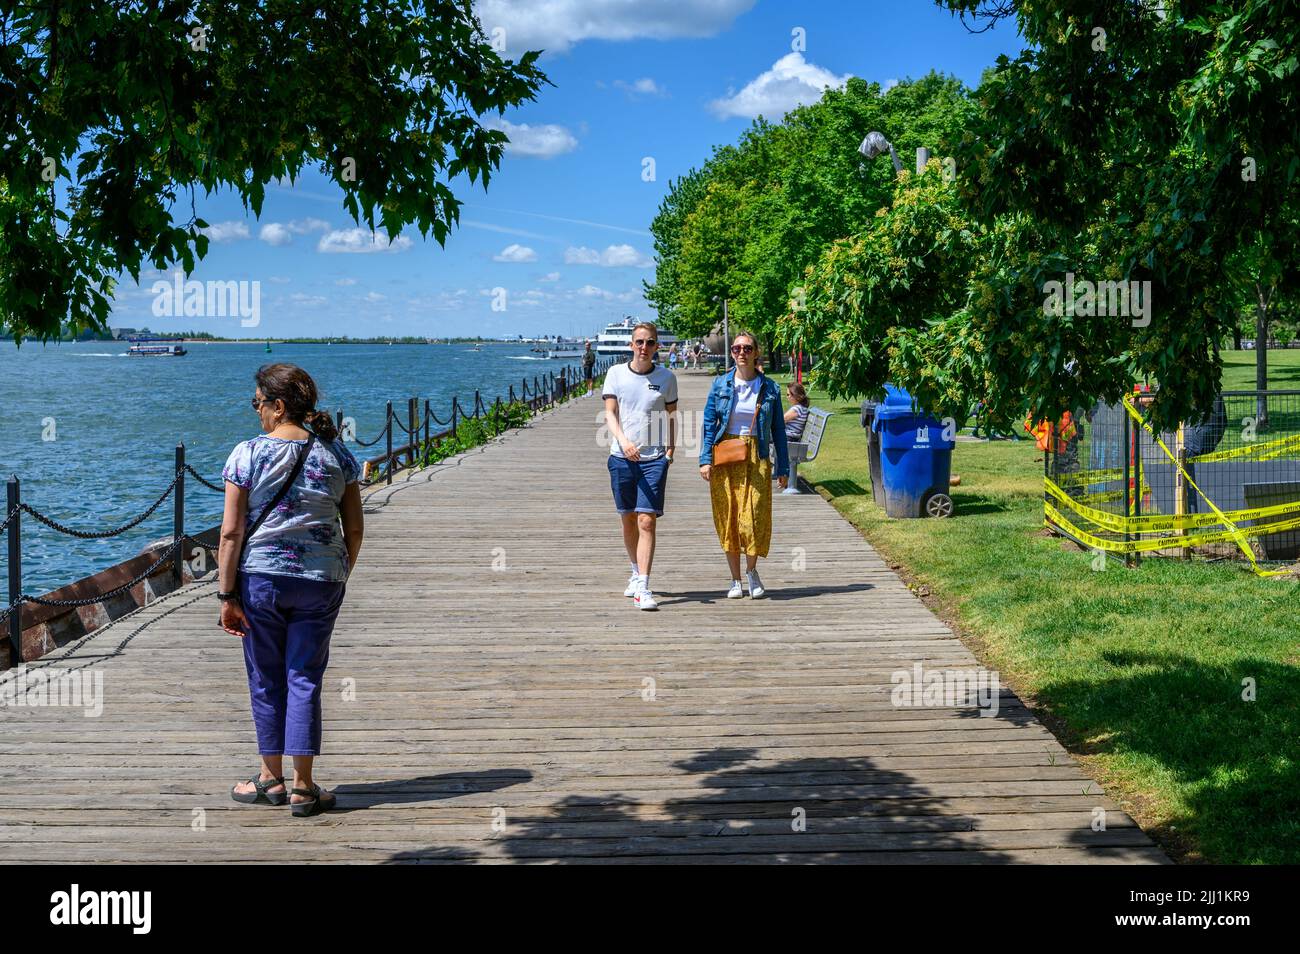 People walking leisurely along the boarswalk at Harbour Square Park on the Toronto harbourfront, Ontario, Canada. Stock Photo